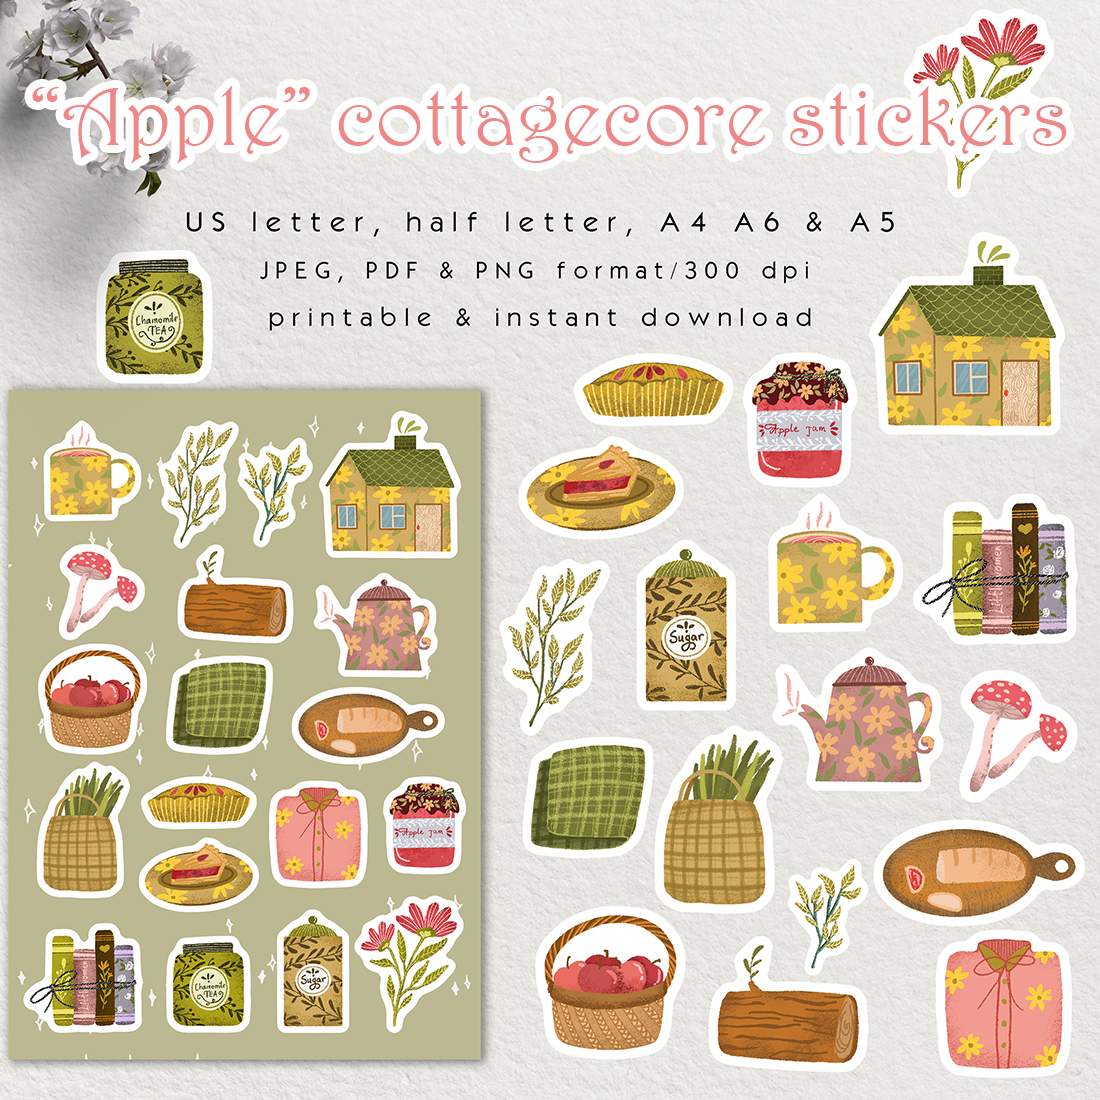 CottageCore Stickers  Scrapbook stickers printable, Phone case stickers,  Macbook cover stickers